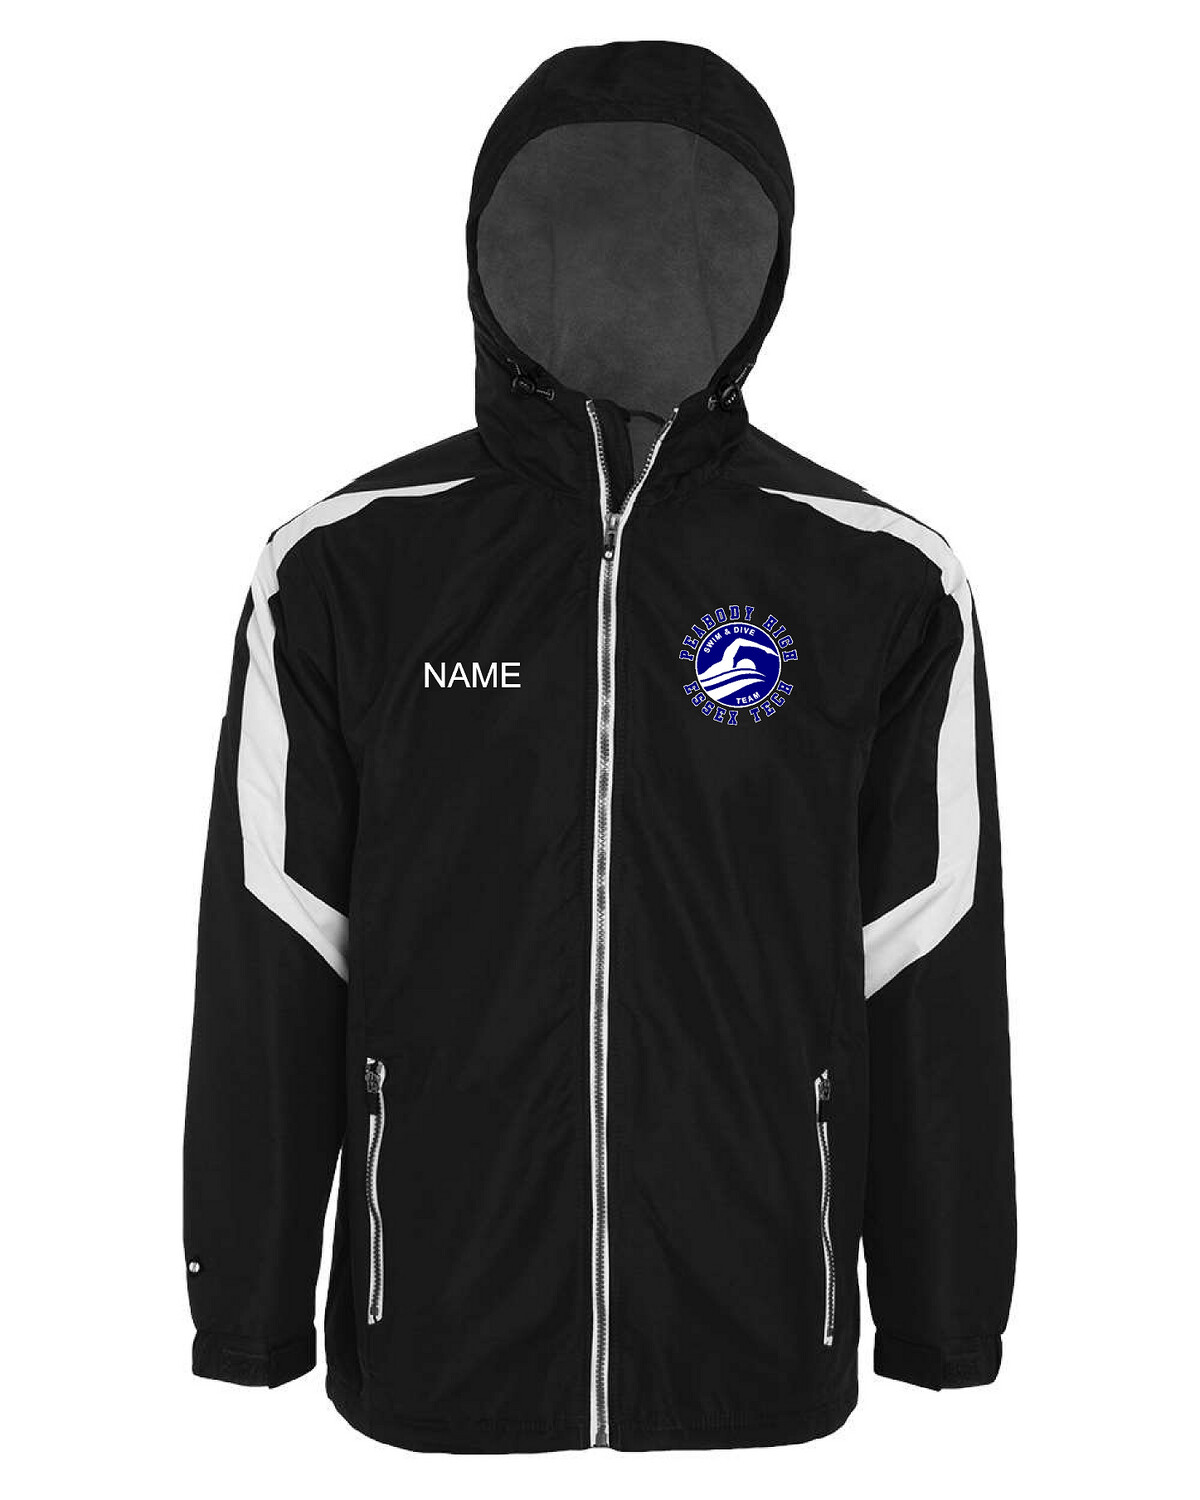 Holloway Brand Charger Essex Tech - Peabody High Embroidered and Printed Micro Fleece Lined Jacket